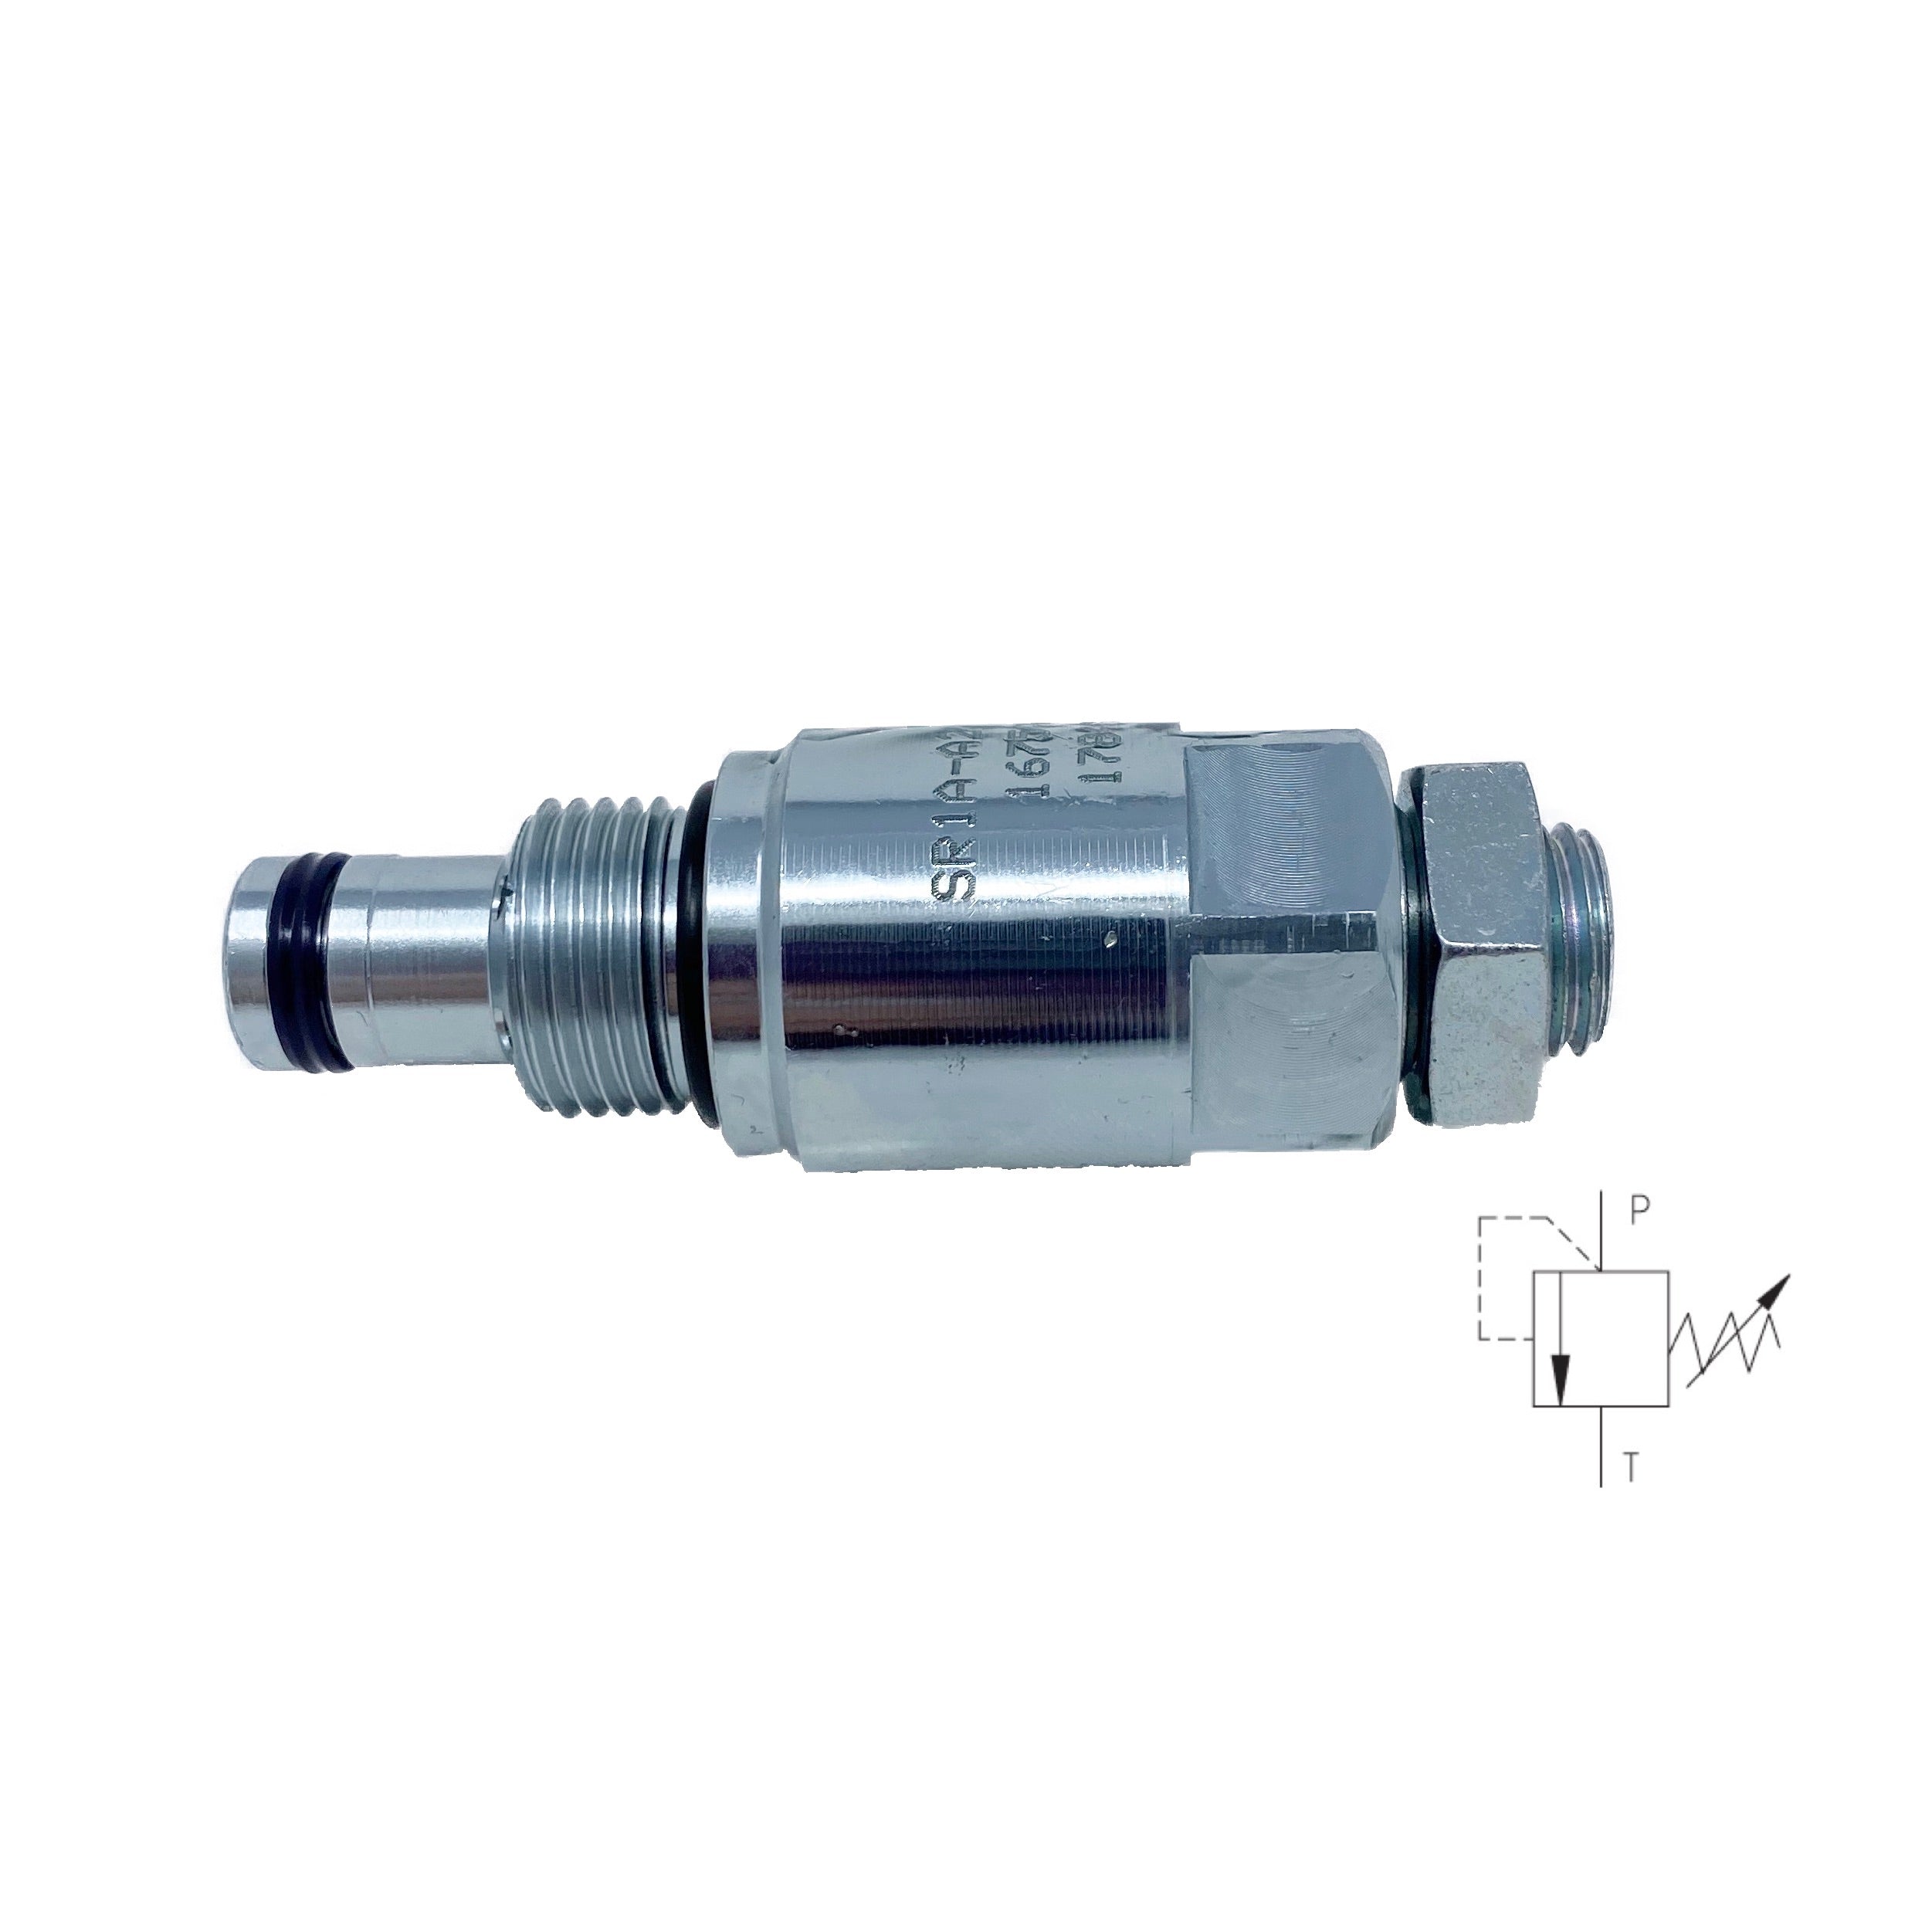 SR1A-A2/L25S-A : Argo Relief, Poppet Type, Direct Acting, 8 GPM, 5100psi, Allen Key, Range to 3630psi, C-8-2 Cavity